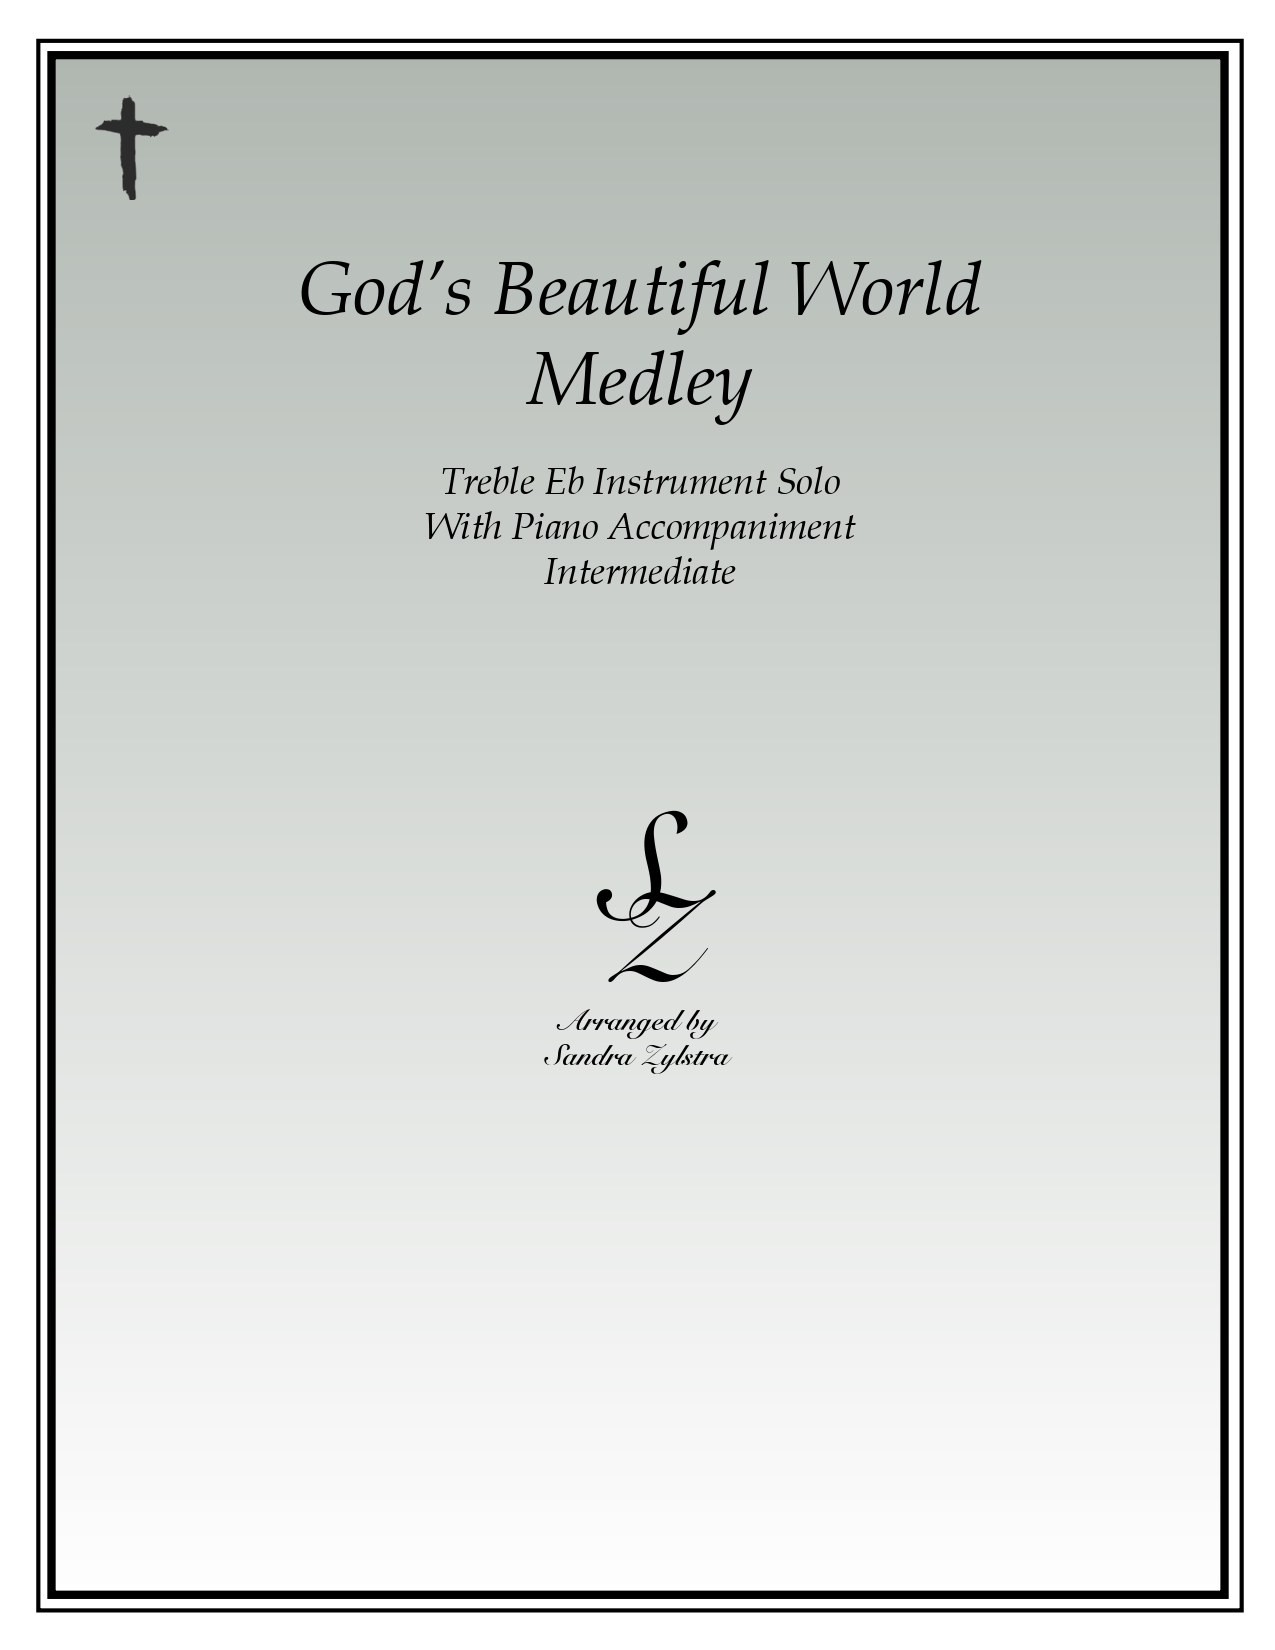 Gods Beautiful World Medley Eb instrument solo part cover page 00011